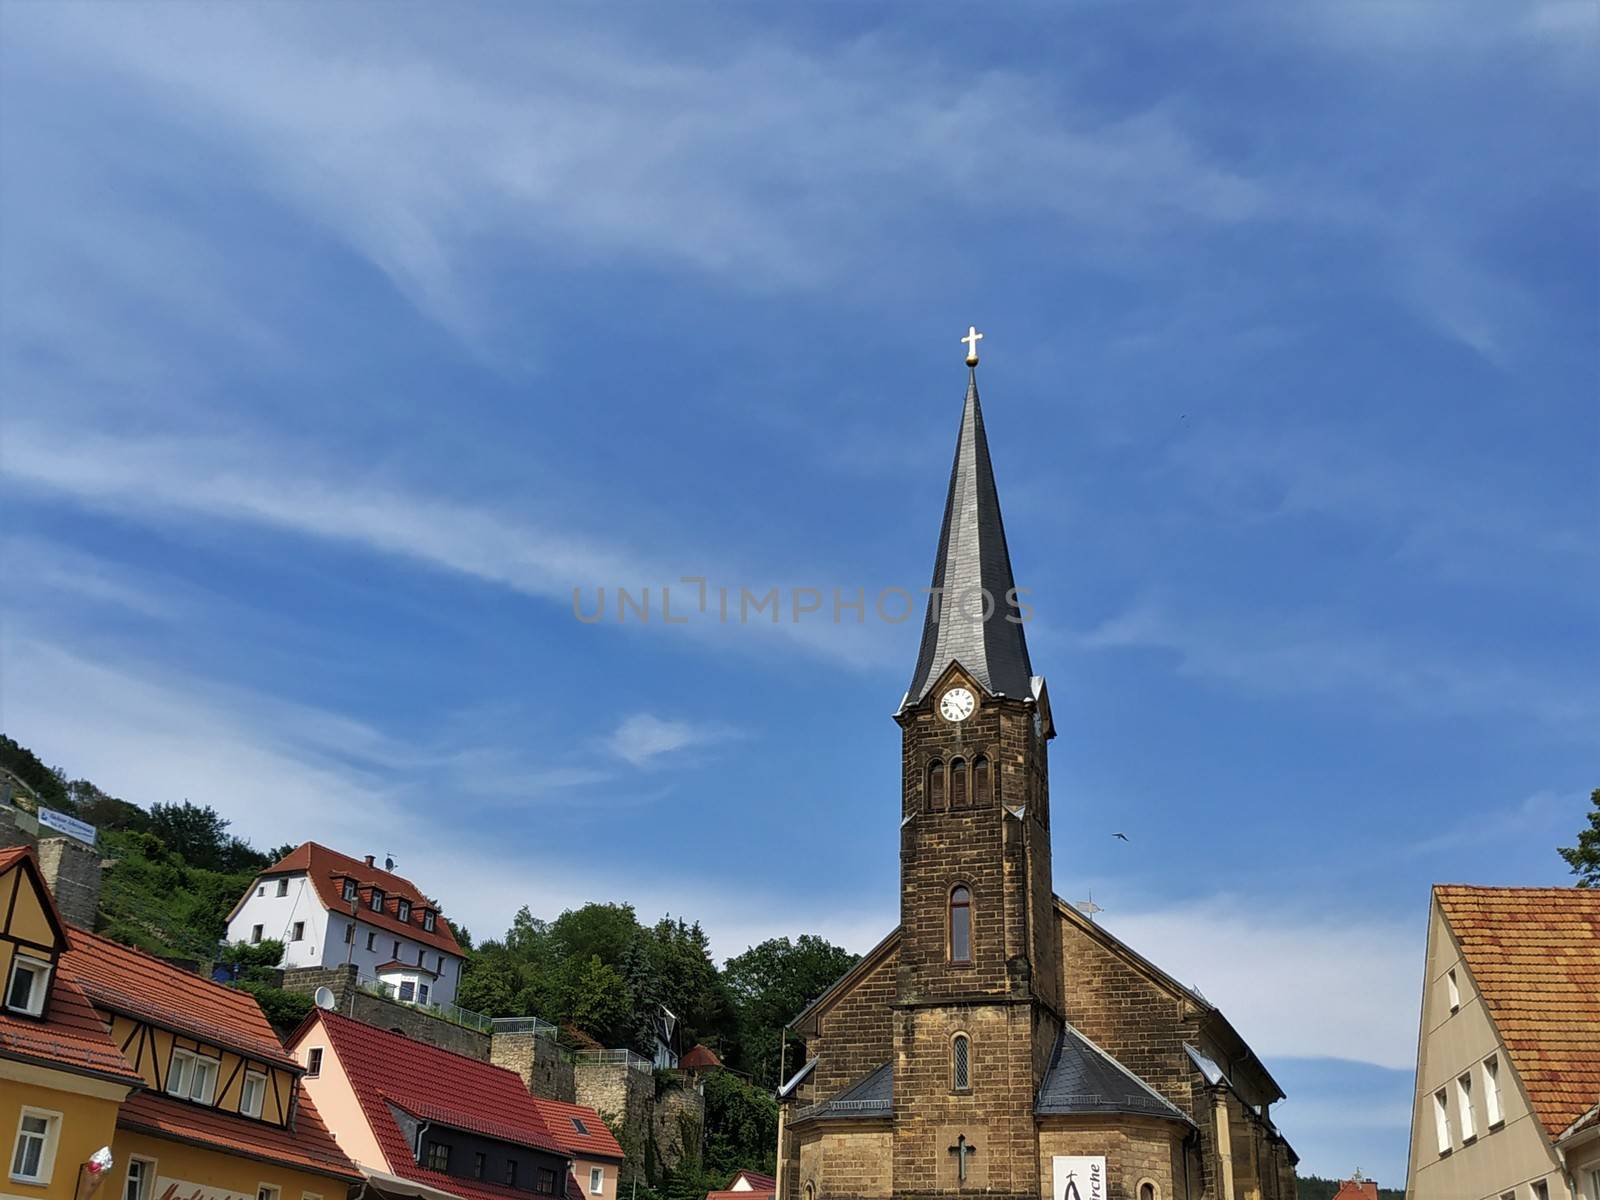 View on the citychurch and surrounding hills of Stadt Wehlen by pisces2386